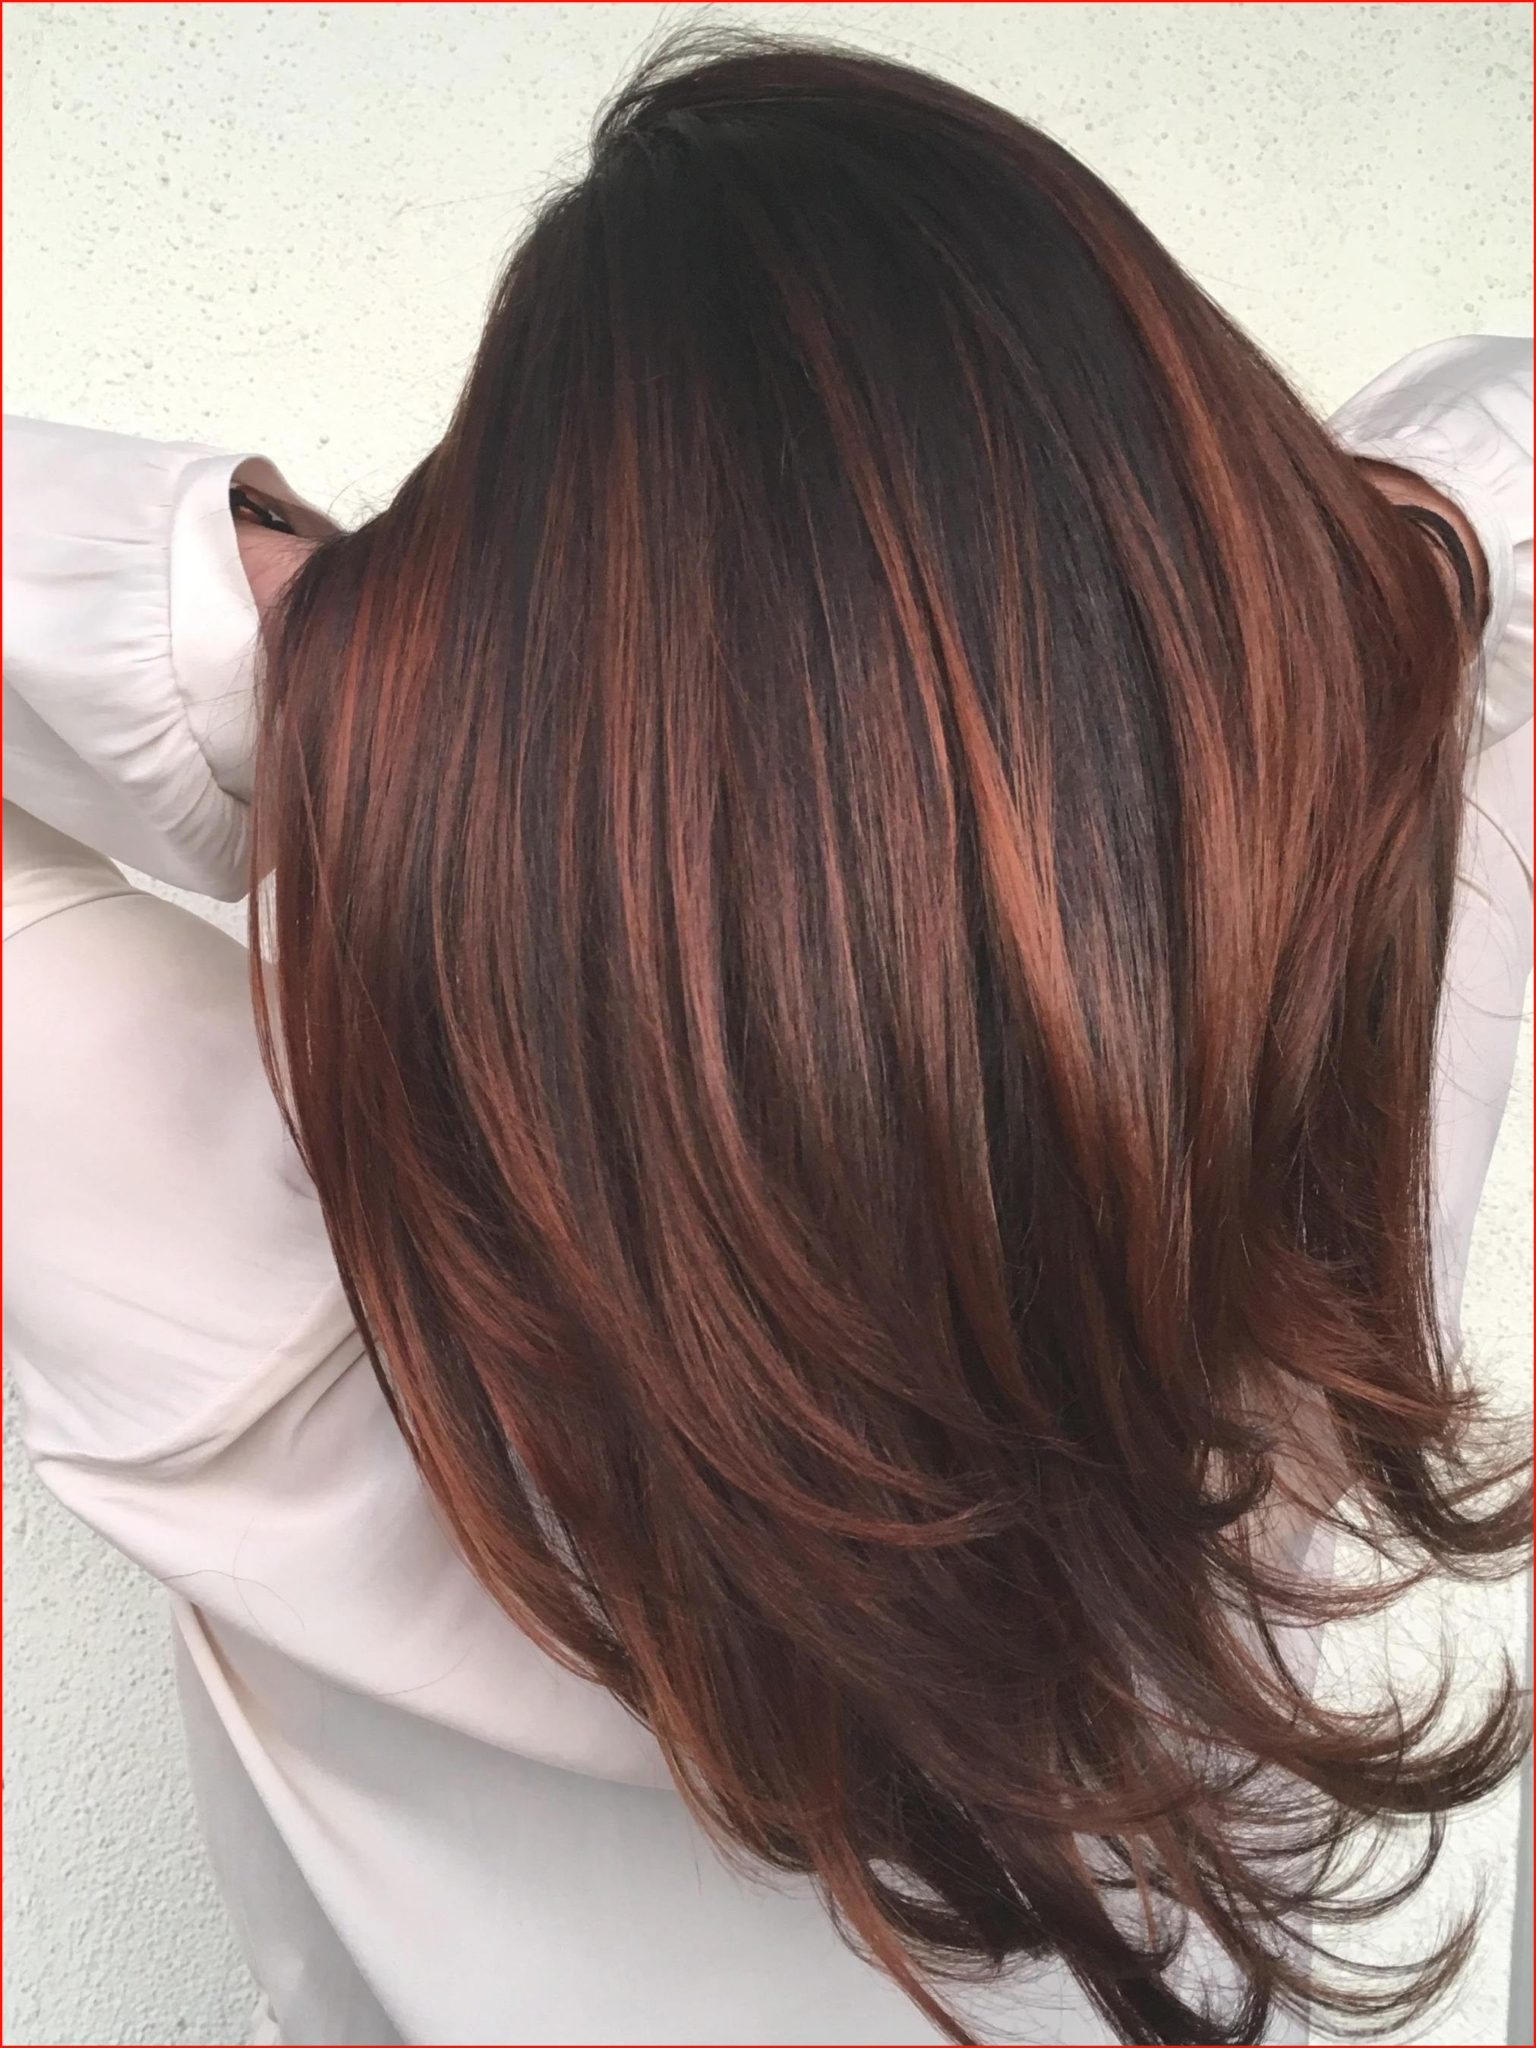 dark hair color ideas with colorful highlights